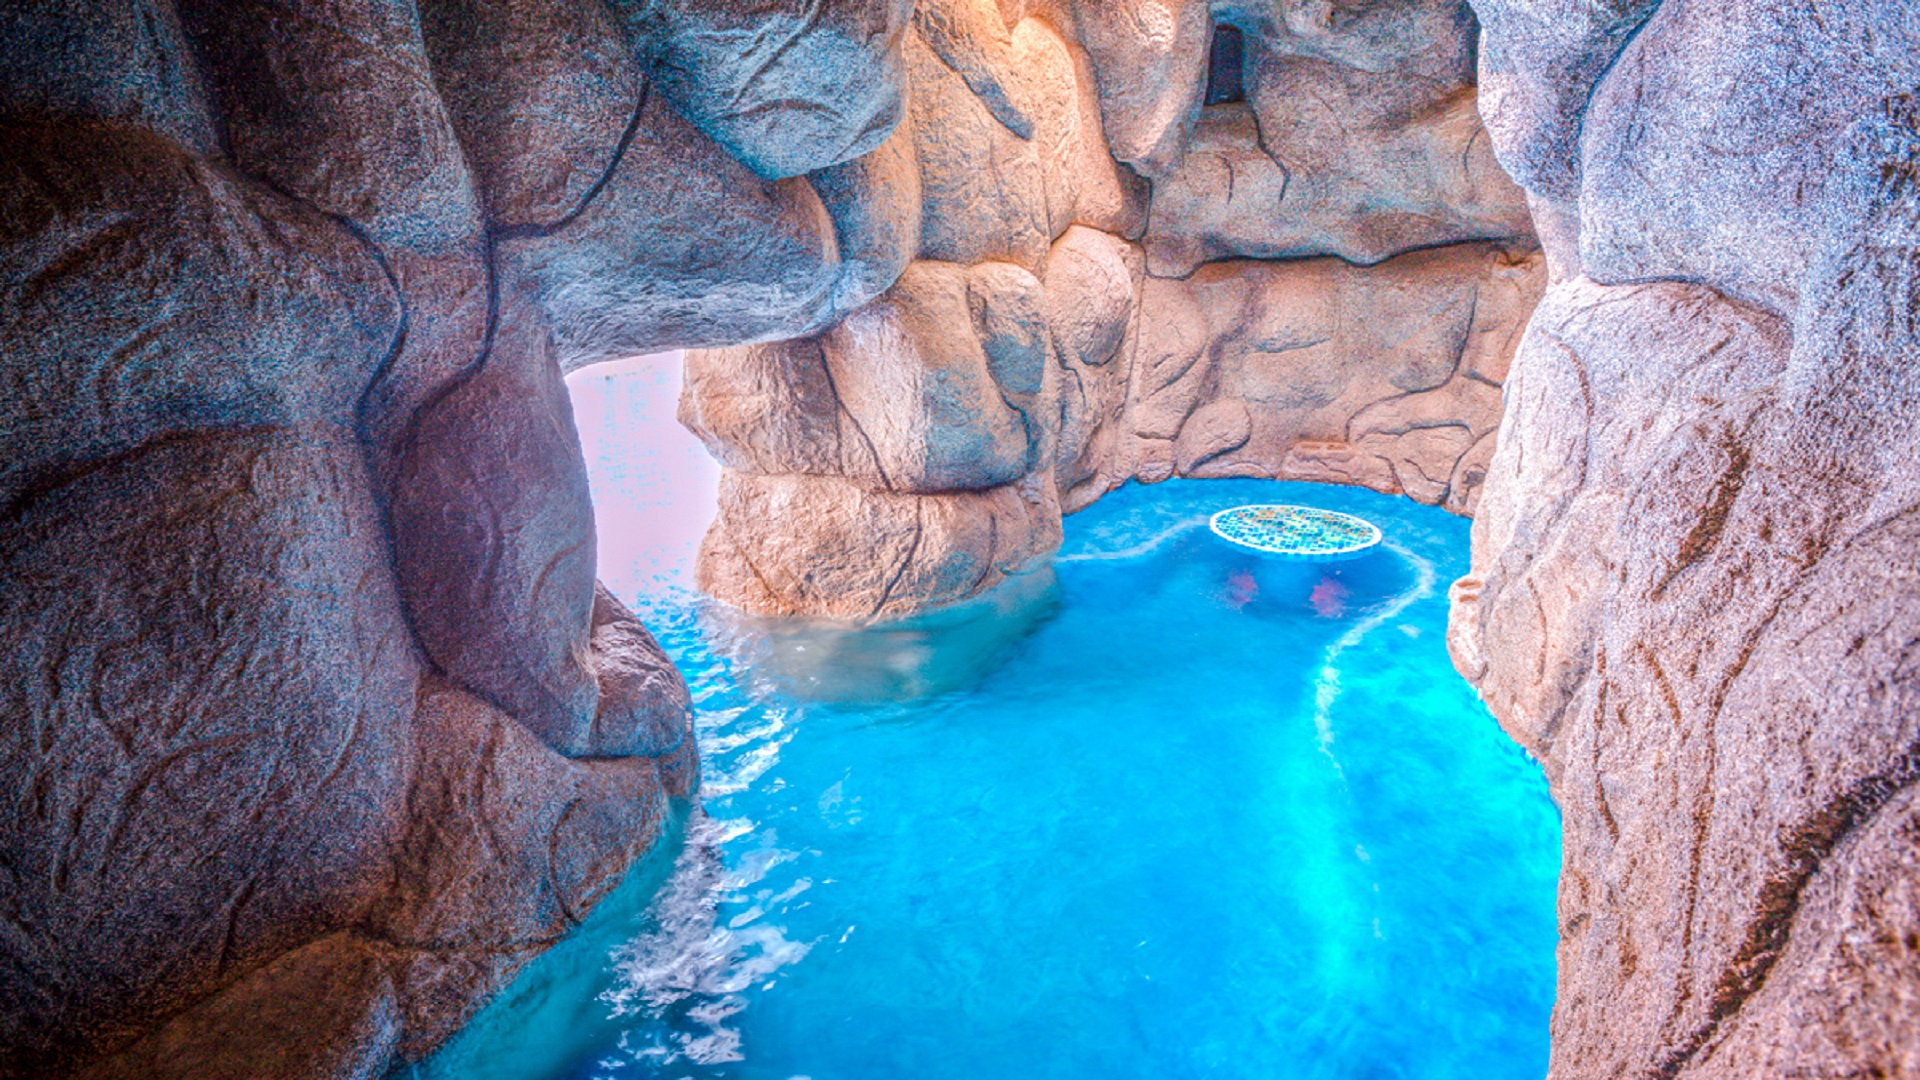 Grotto in the pool